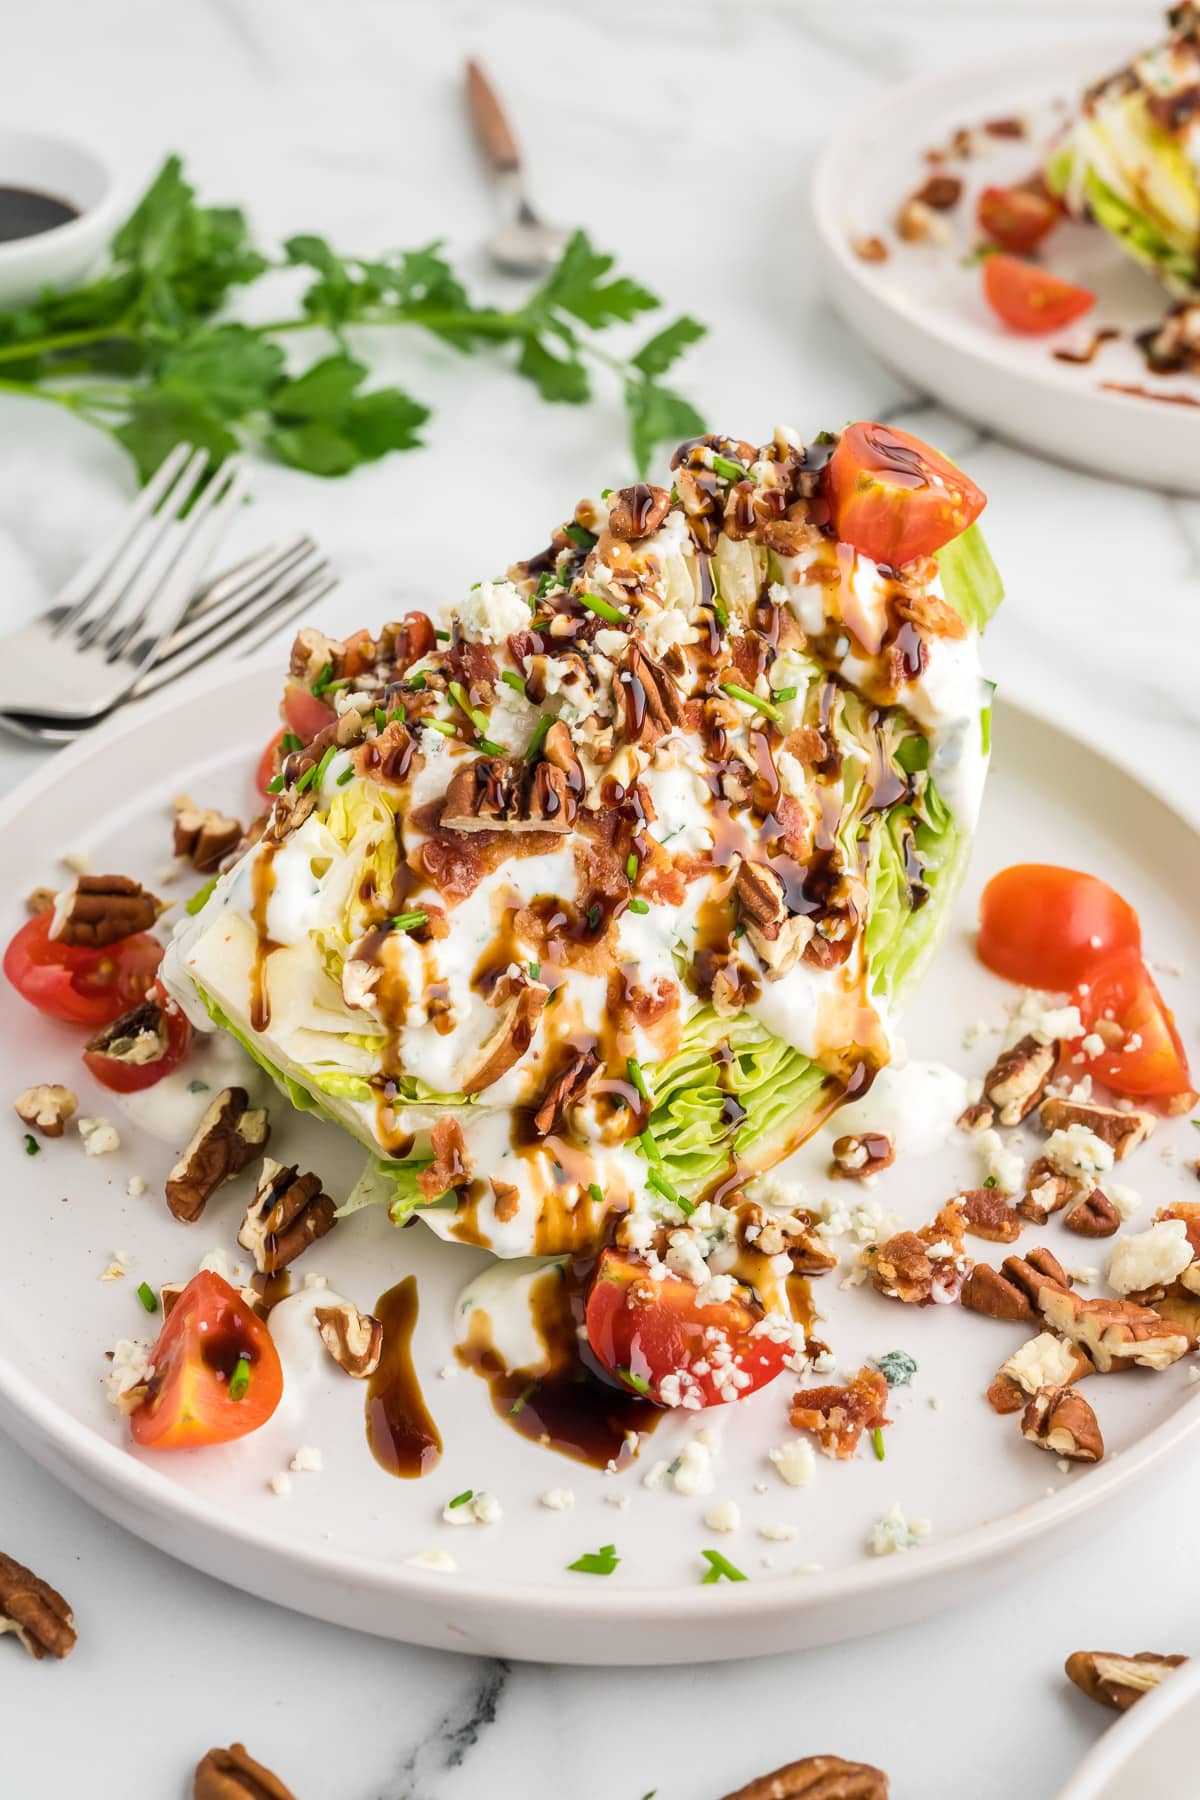 A wedge salad on a plate